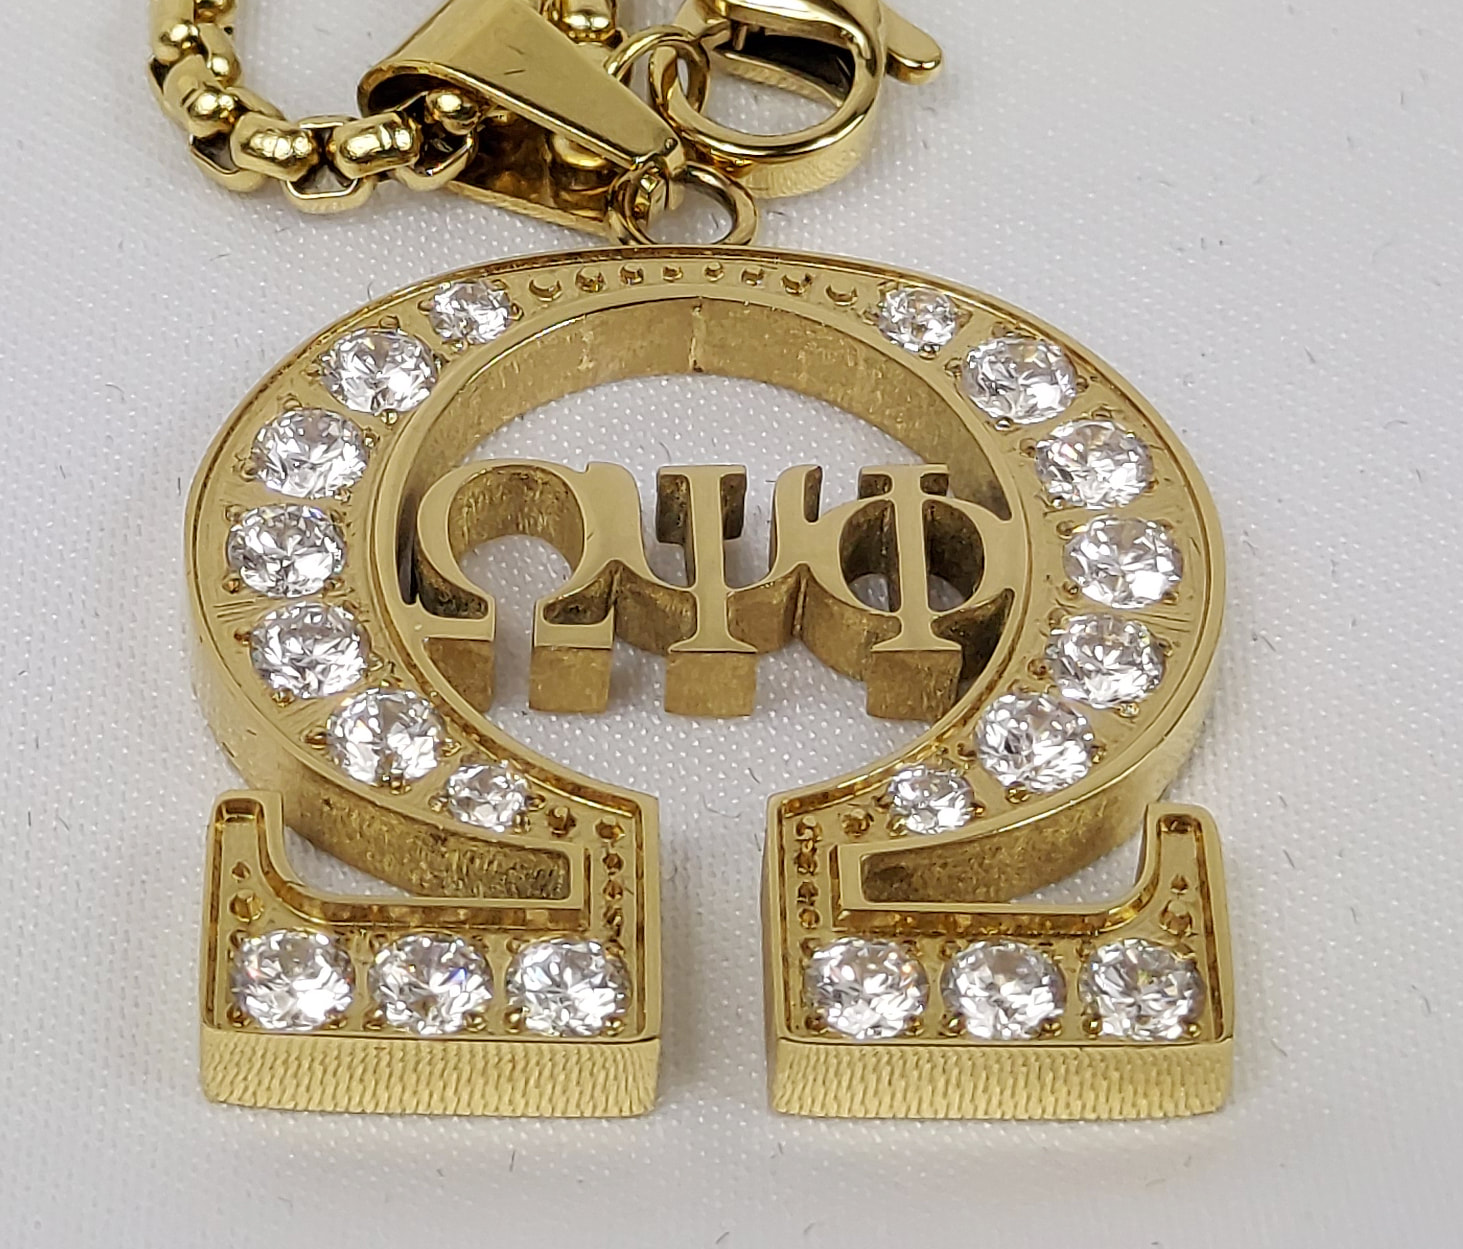 omega psi phi gold necklace